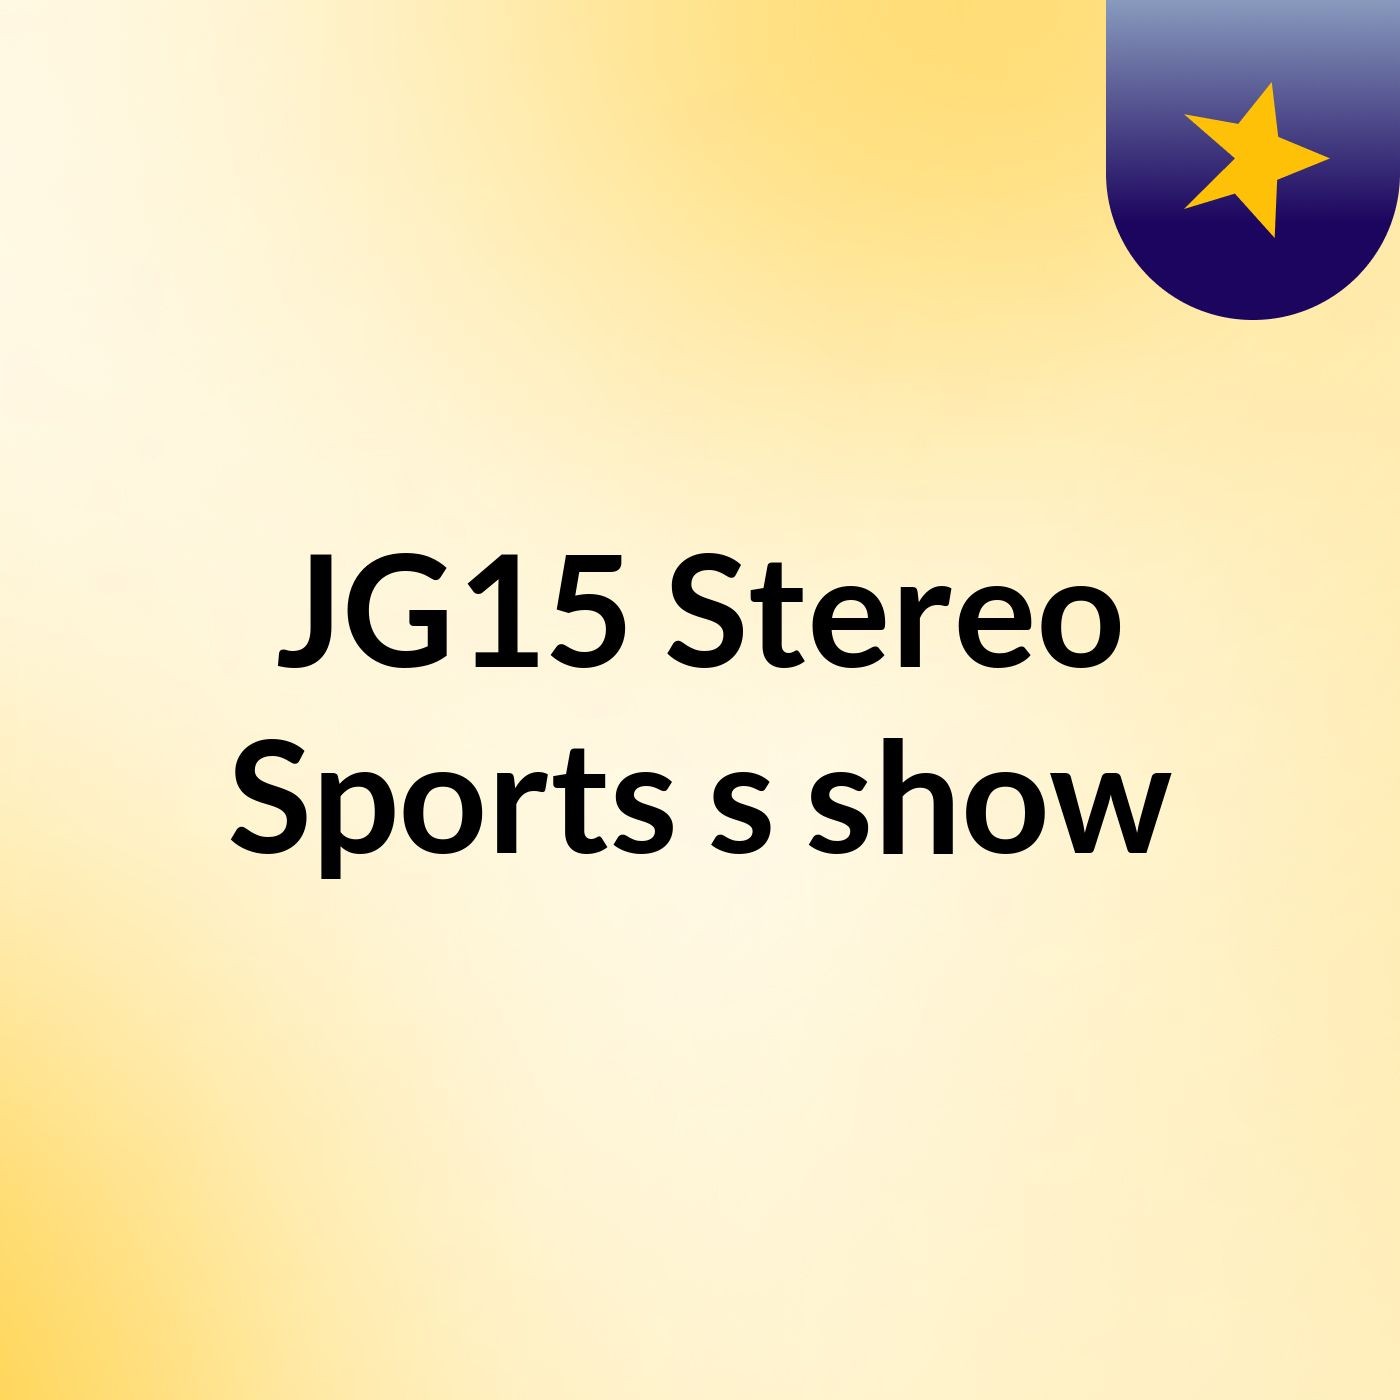 JG15 Stereo Sports's show